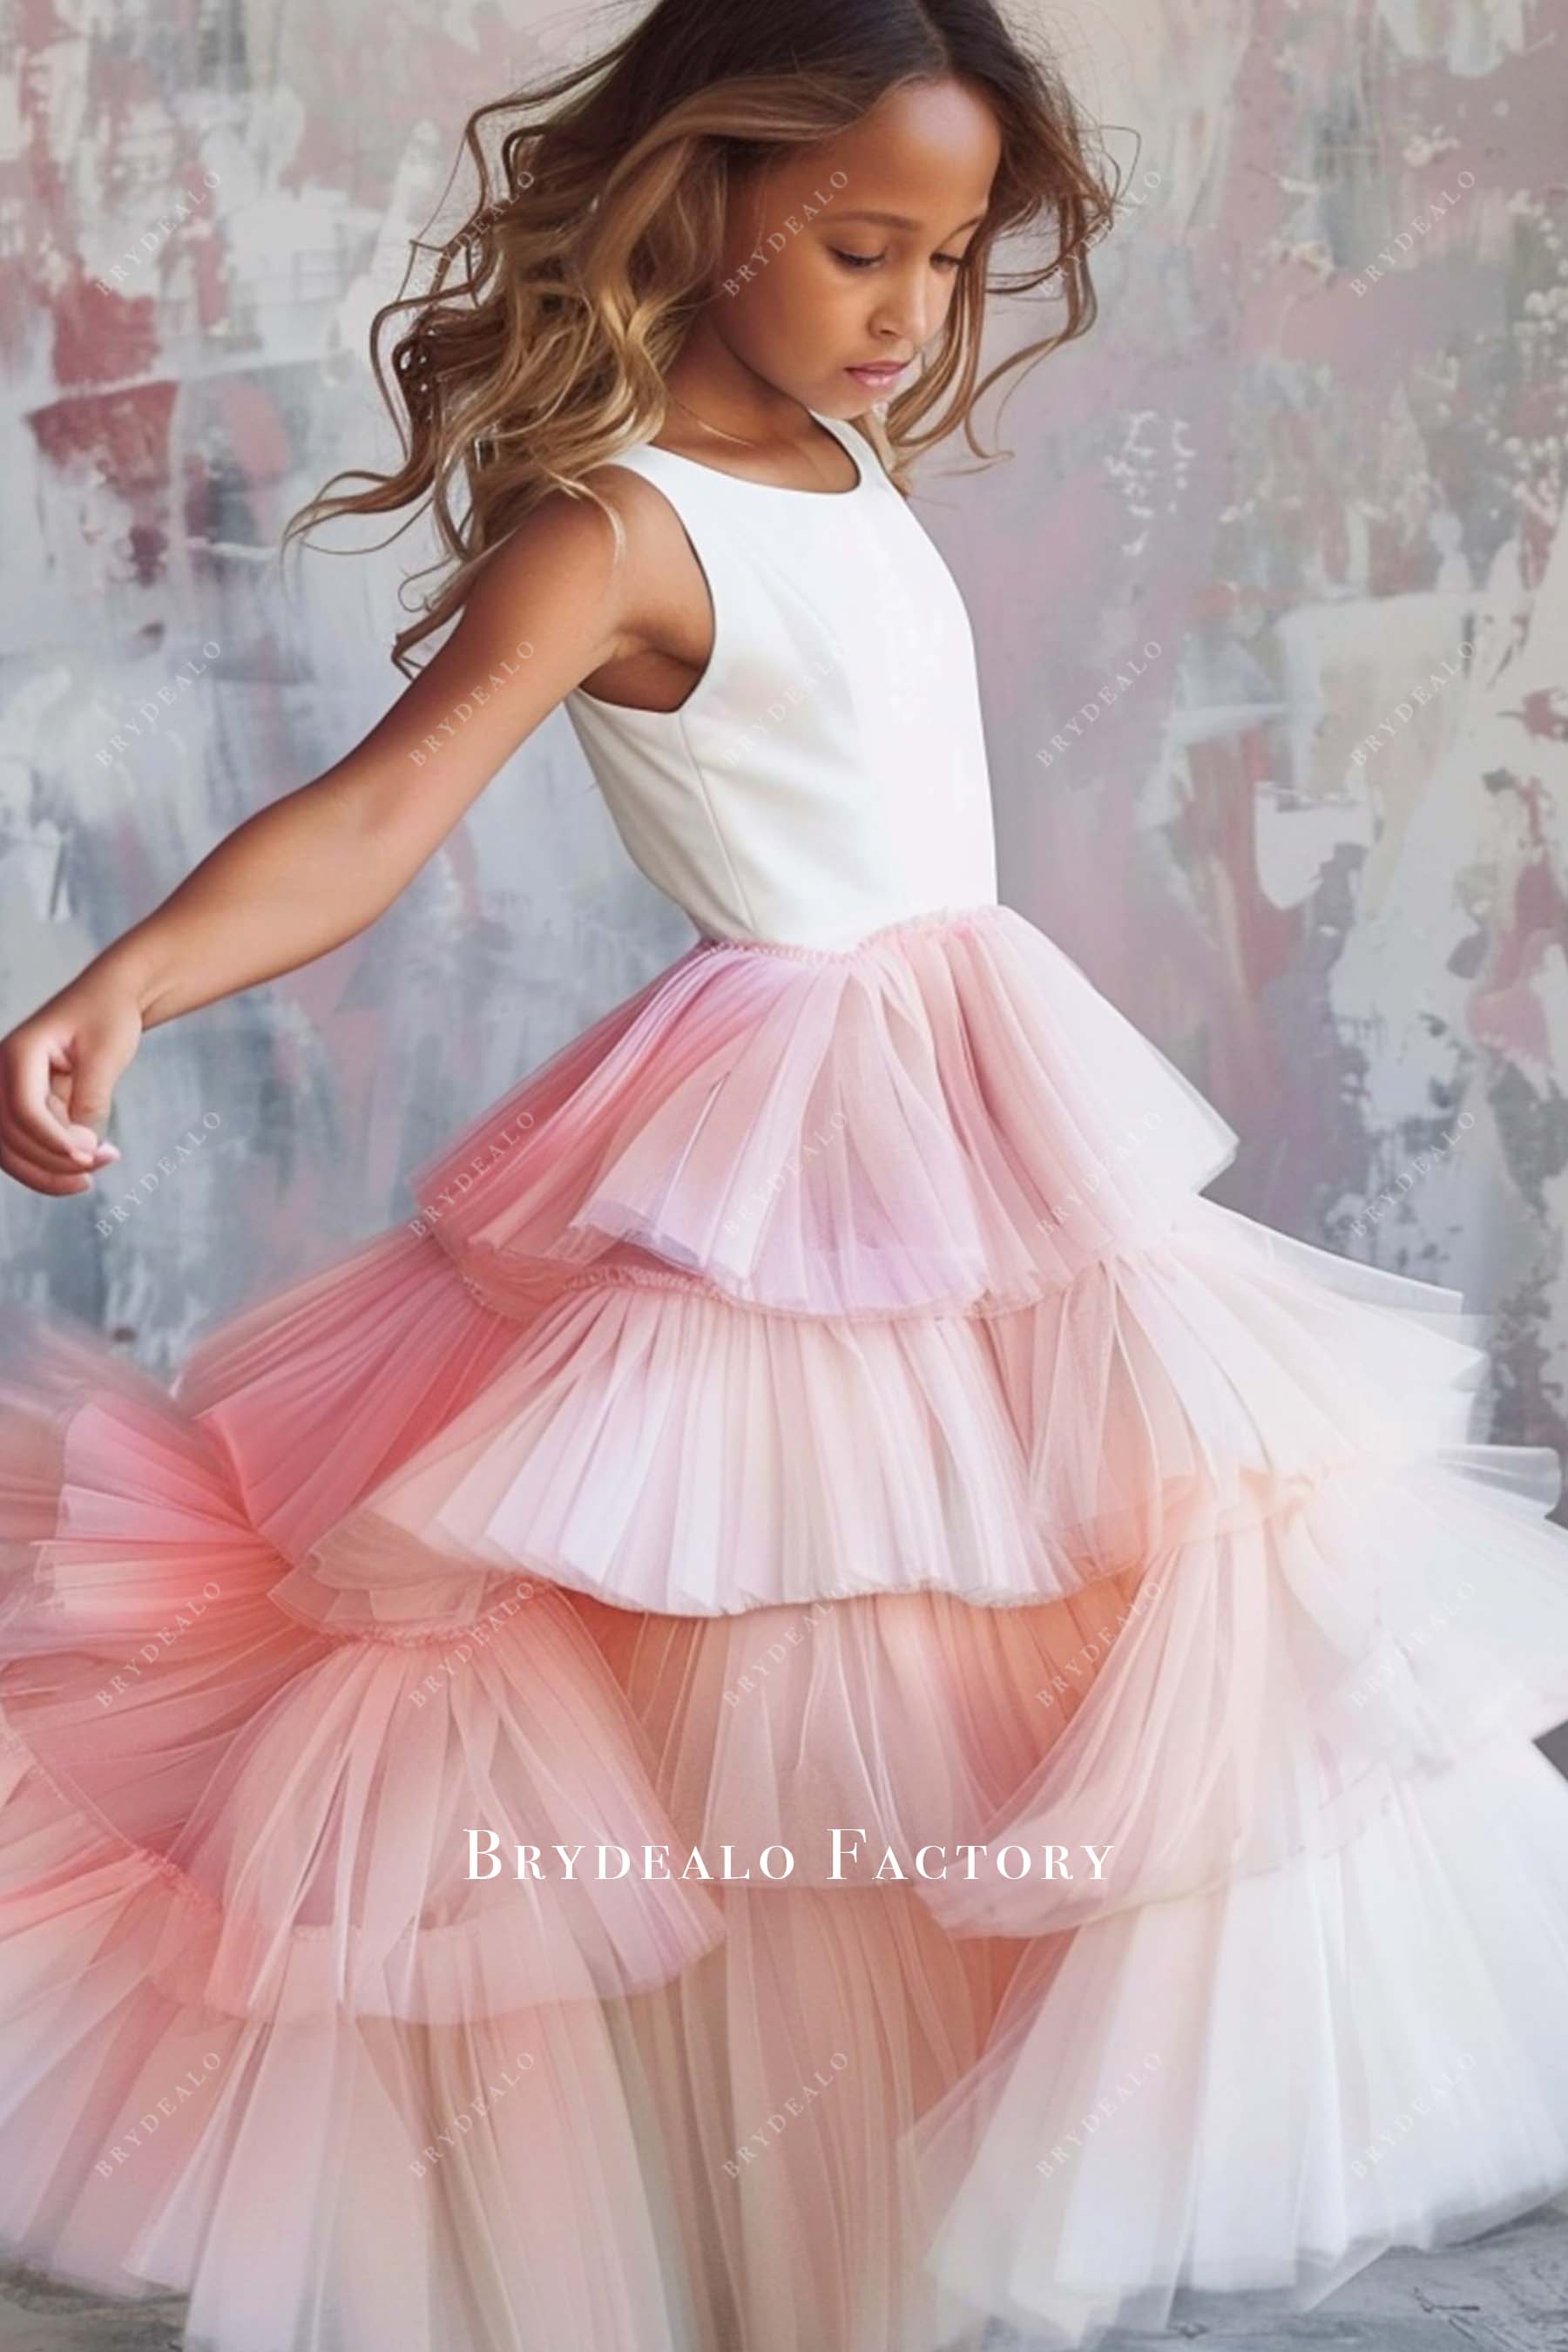 Multi Color Tulle Tiered Ruffles Ball Gown Flower Girl Dress